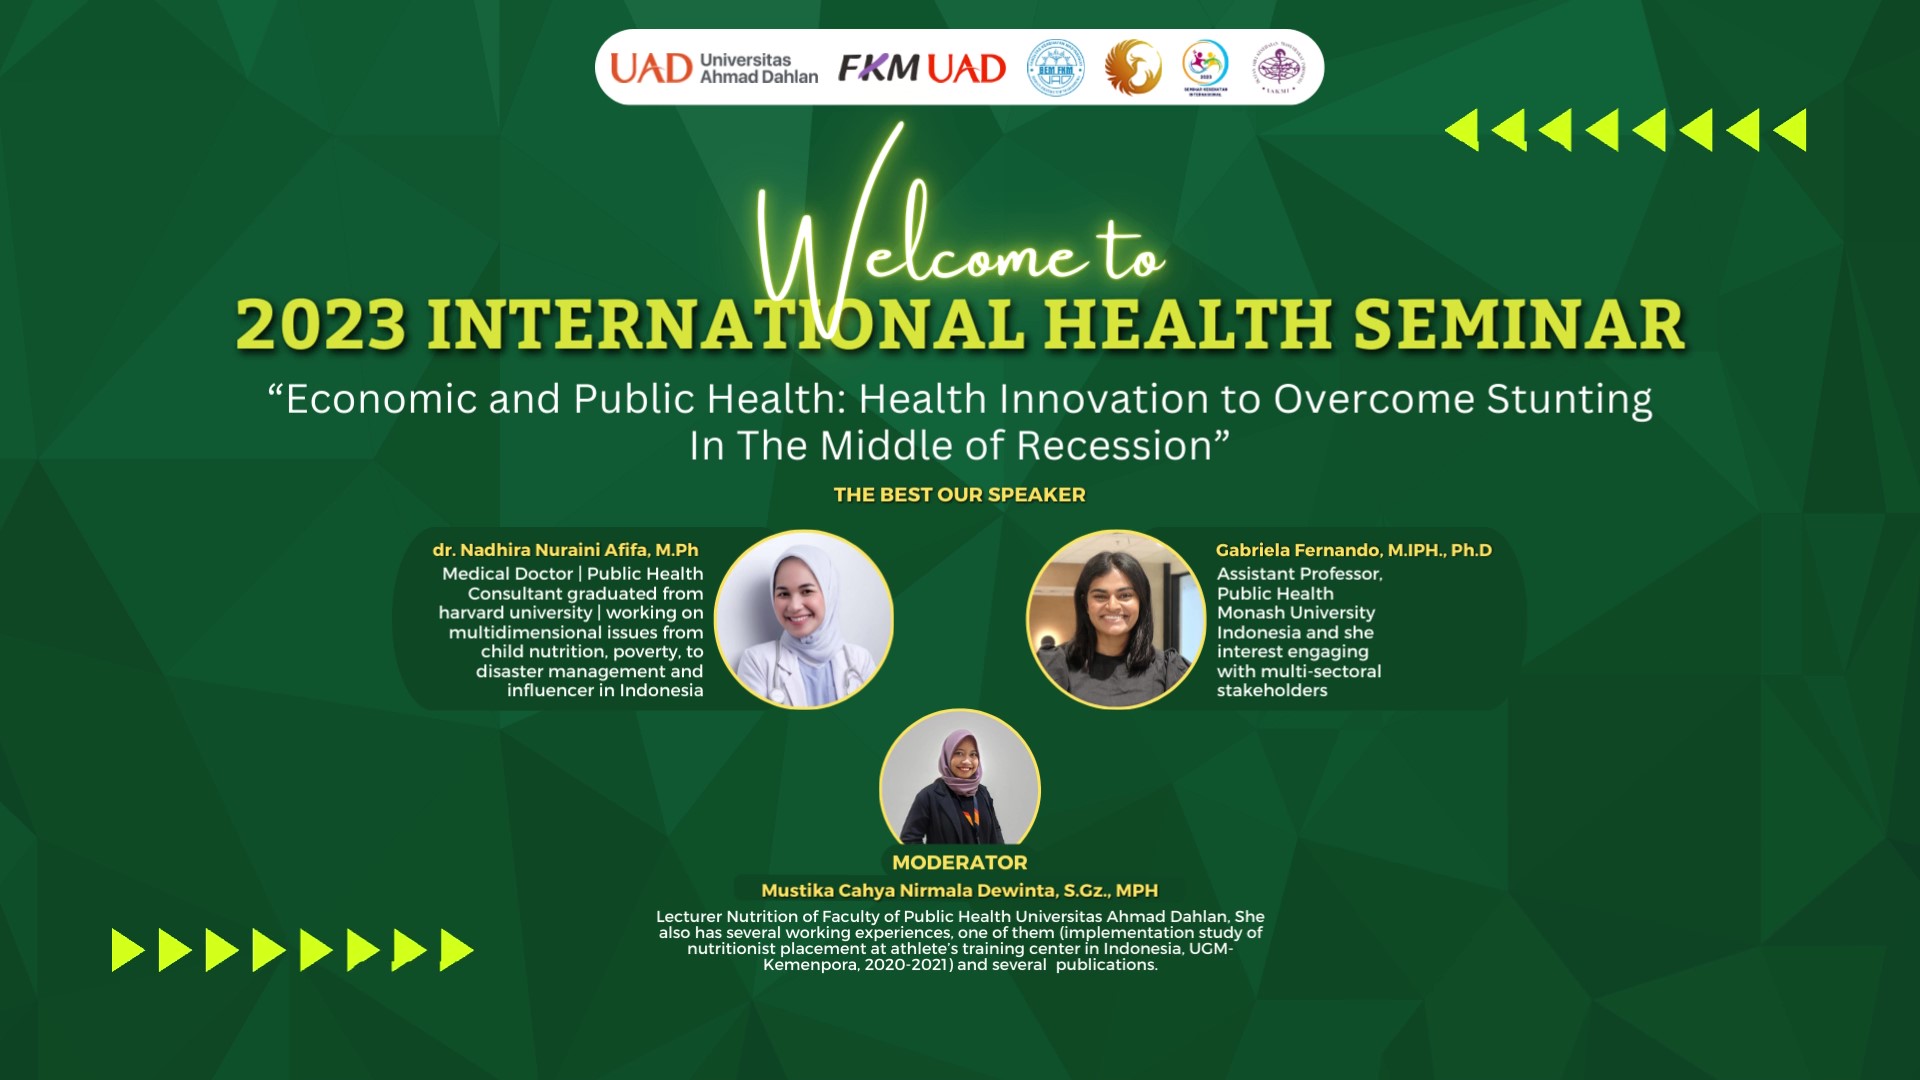 Seminar Kesehatan Internasional FKM UAD 2023 "Economic and Public Health: Health Innovation to Overcome Stunting In The Middle of Recession"